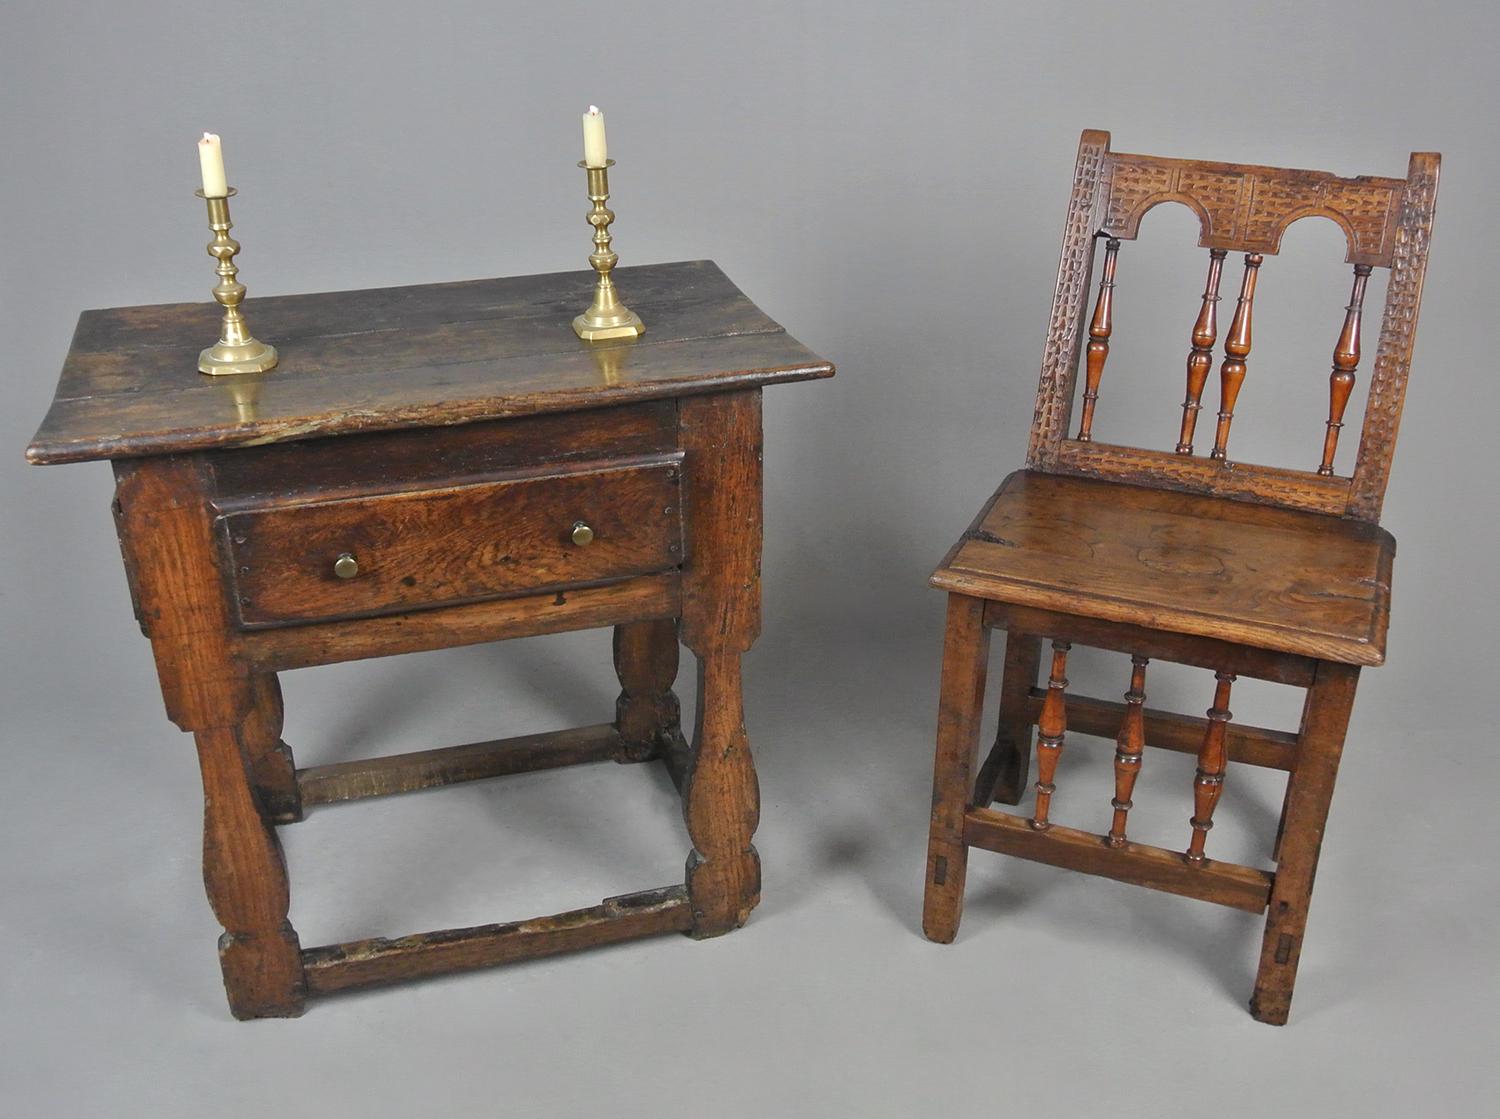 An absolutely beautiful and very early walnut chair with finely turned yew wood spindles, exposed tenons, chip carved U-gouge running cable decoration. Original timbers and pegs throughout other than the flanking (farthest back and furthest front)